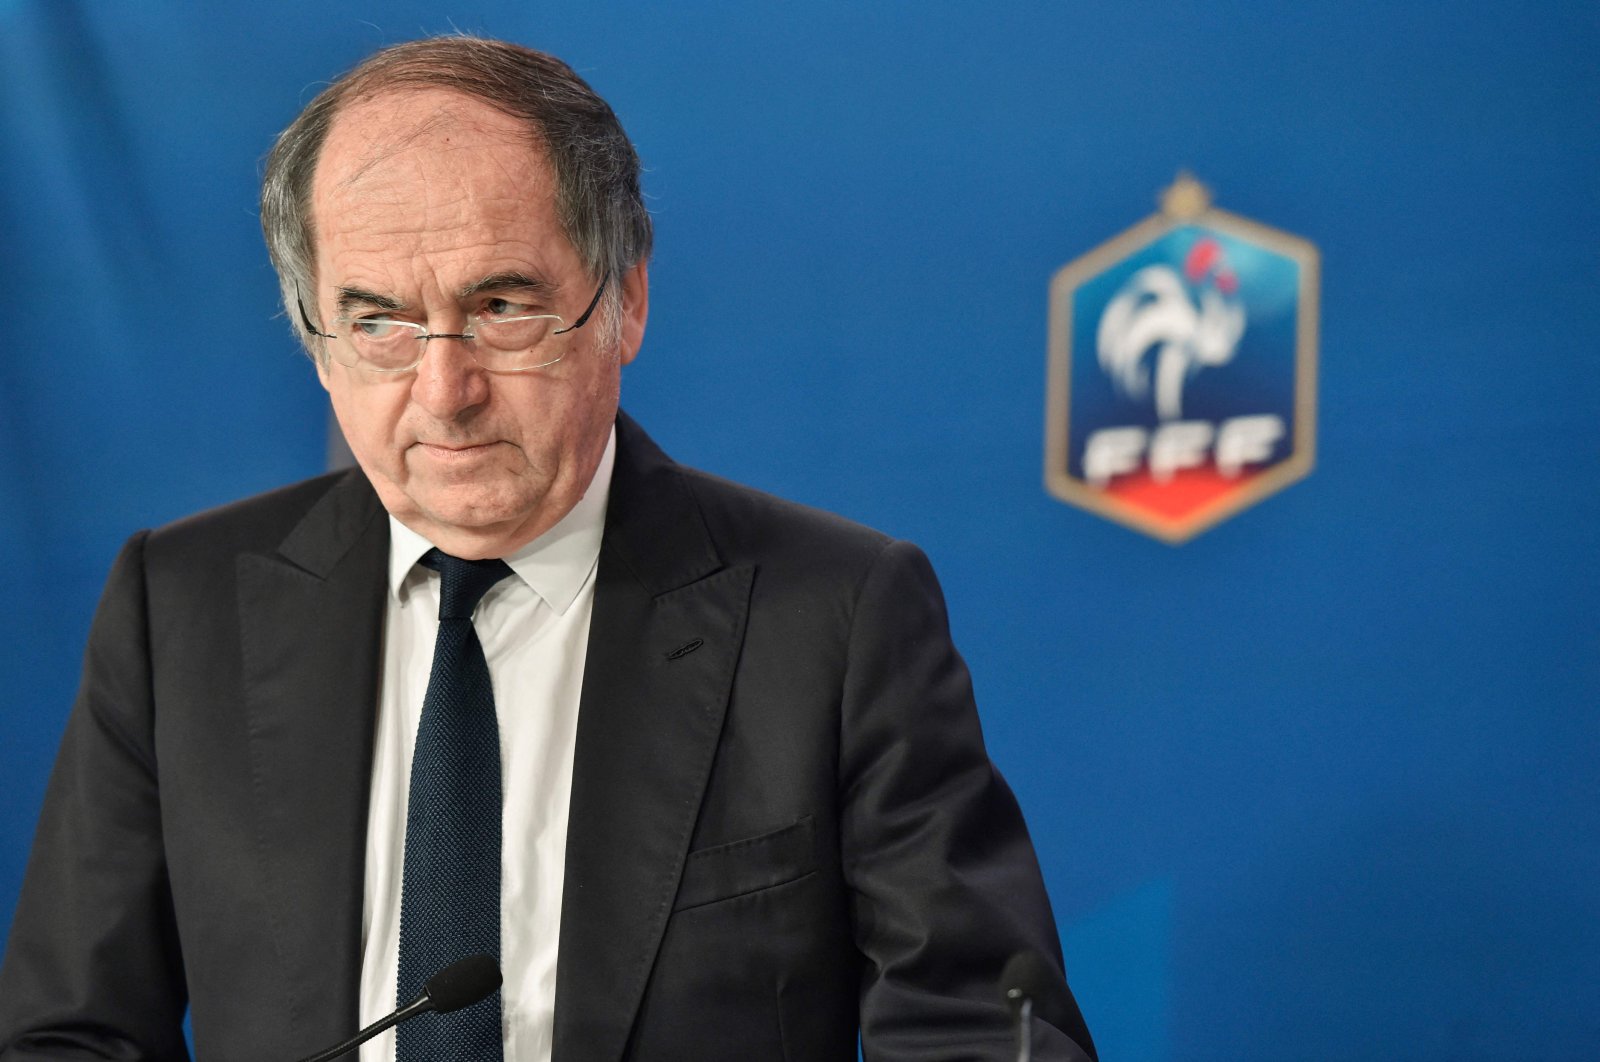 French Football Federation (FFF) President Noel Le Graet gives a press conference on the Euro 2016 football tournament, Paris, France, July 12, 2016 (AFP Photo)